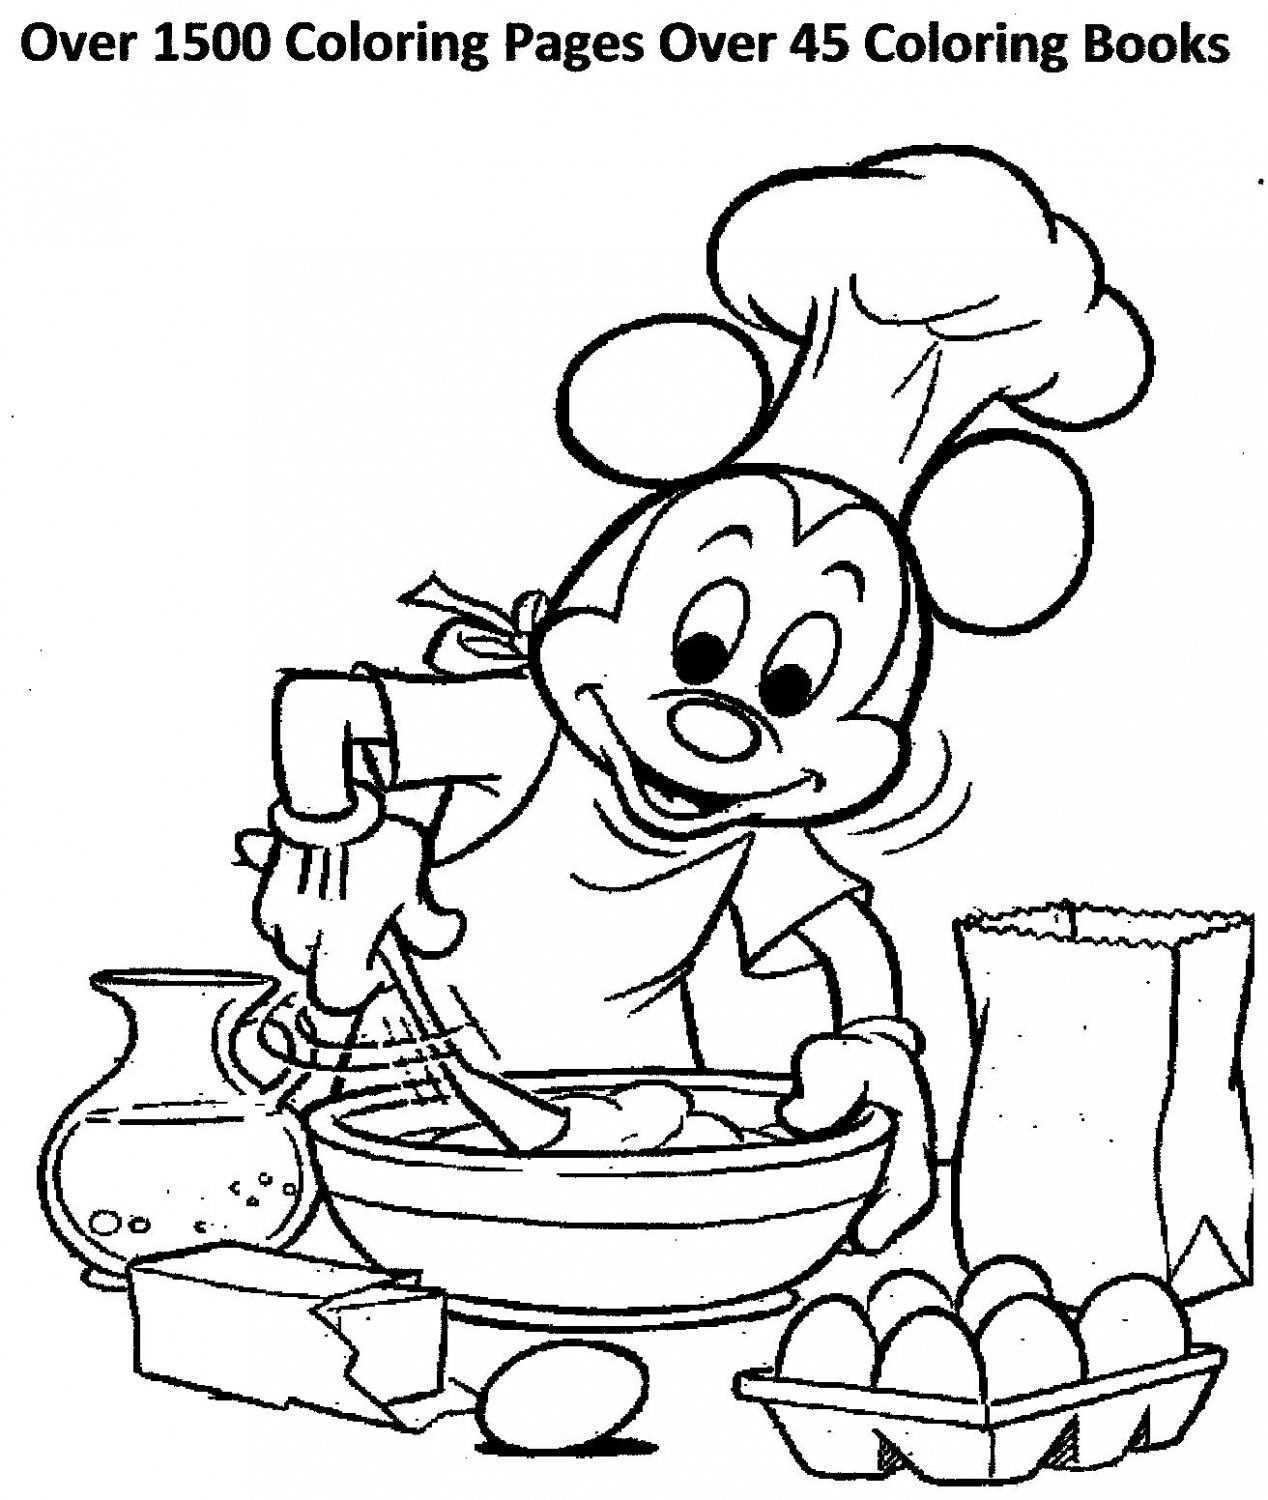 Over 1500 Coloring Pages Over 45 Coloring Books Mickey Mouse Coloring Pages Disney Co